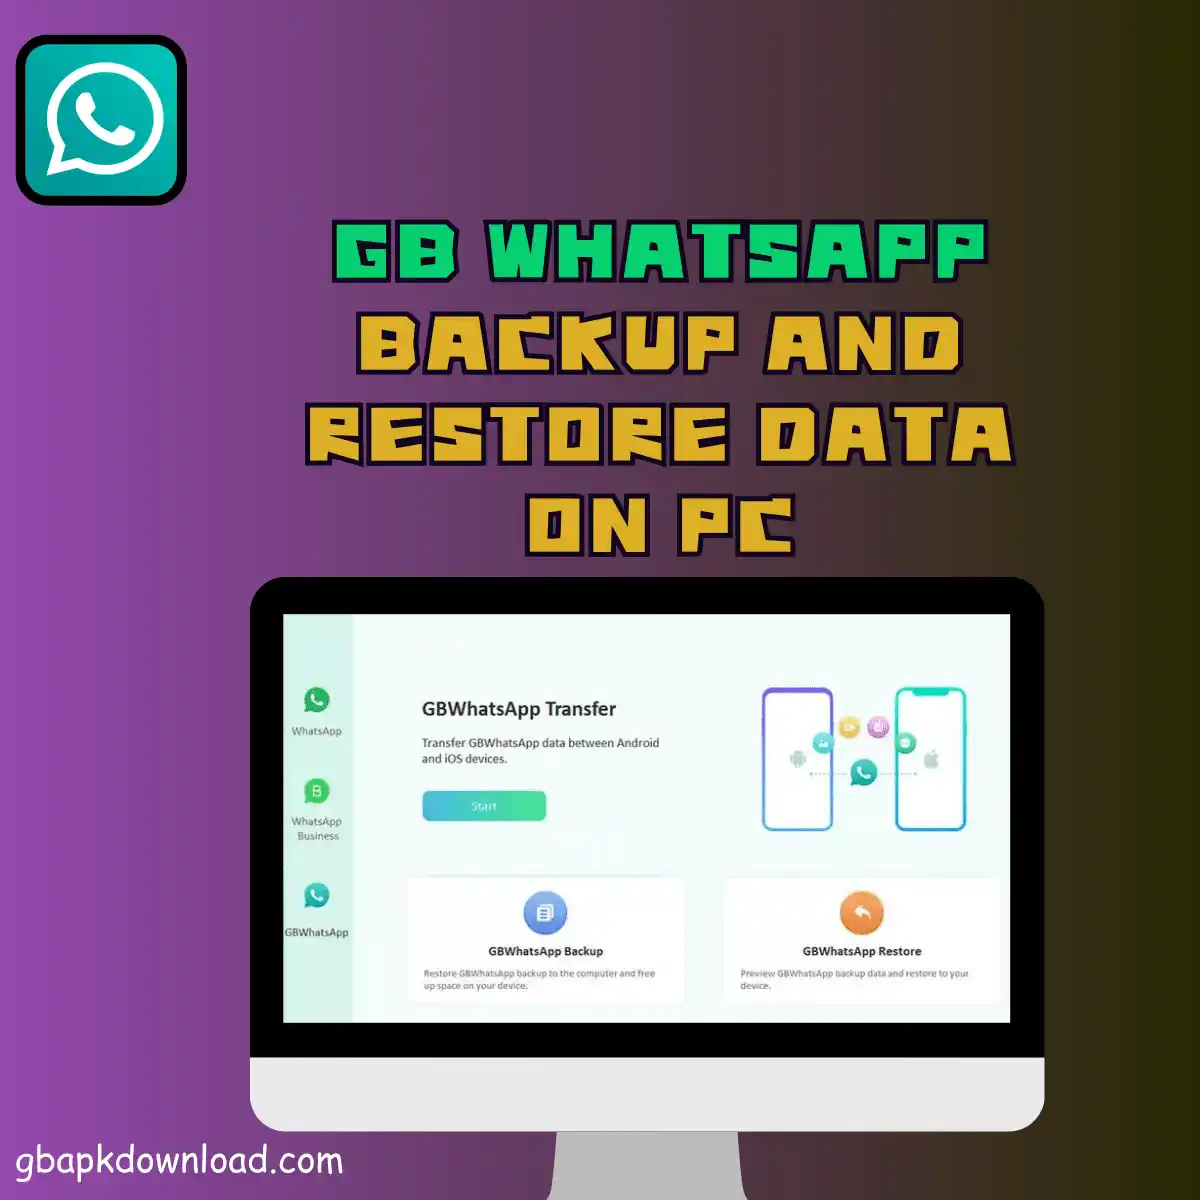 GB WhatsApp Backup and restore data on the PC